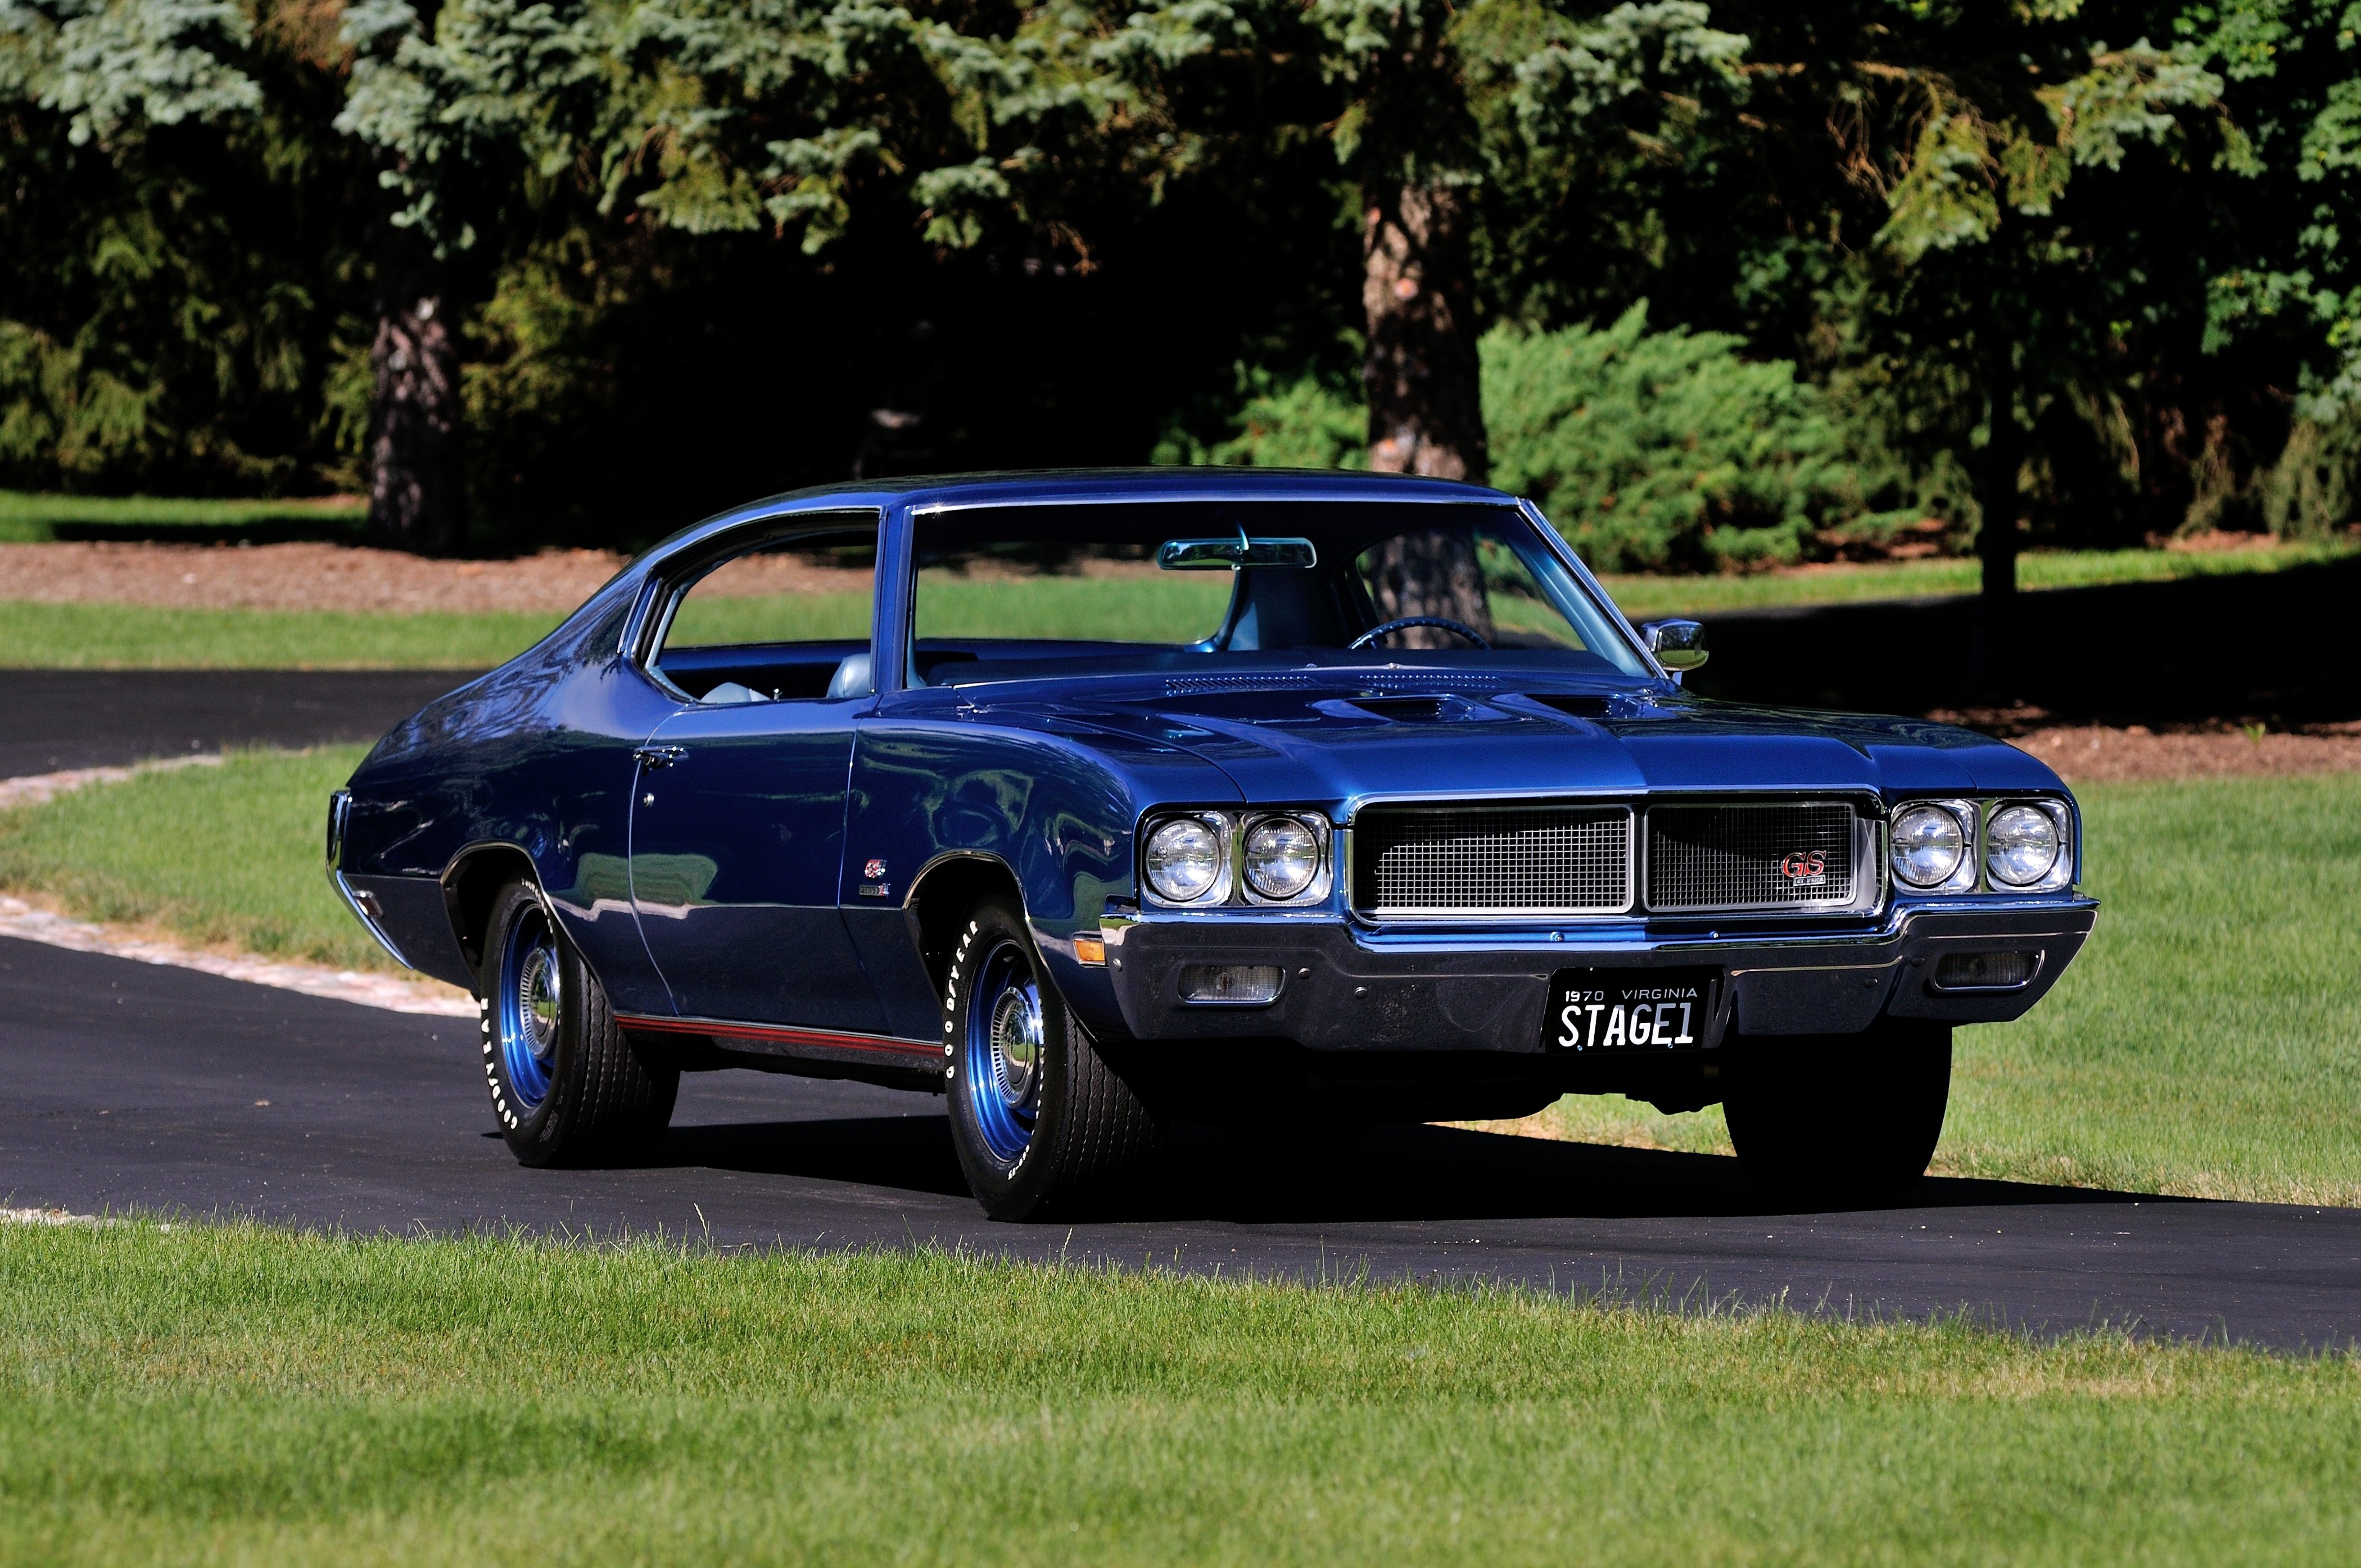 1970, Buick, Gs, Stage1, Muscle, Classic, Usa, D, 4200x2790 19 Wallpaper